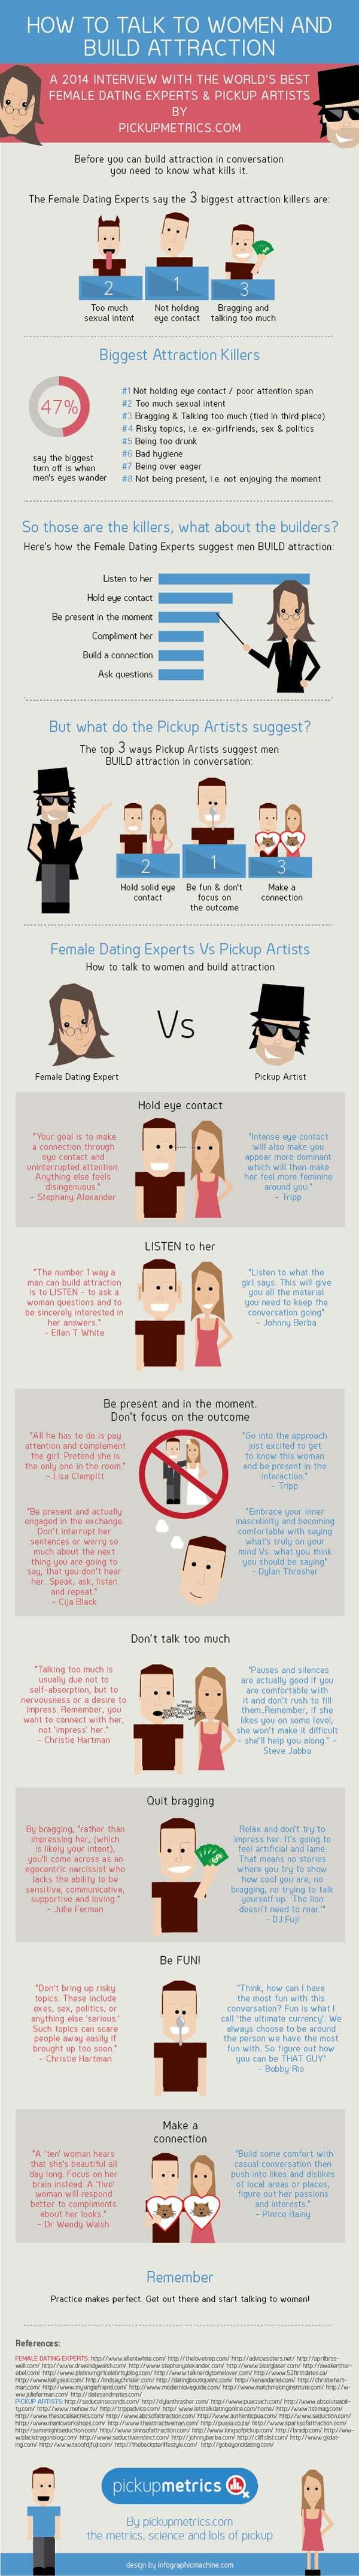 How-to-talk-to-women